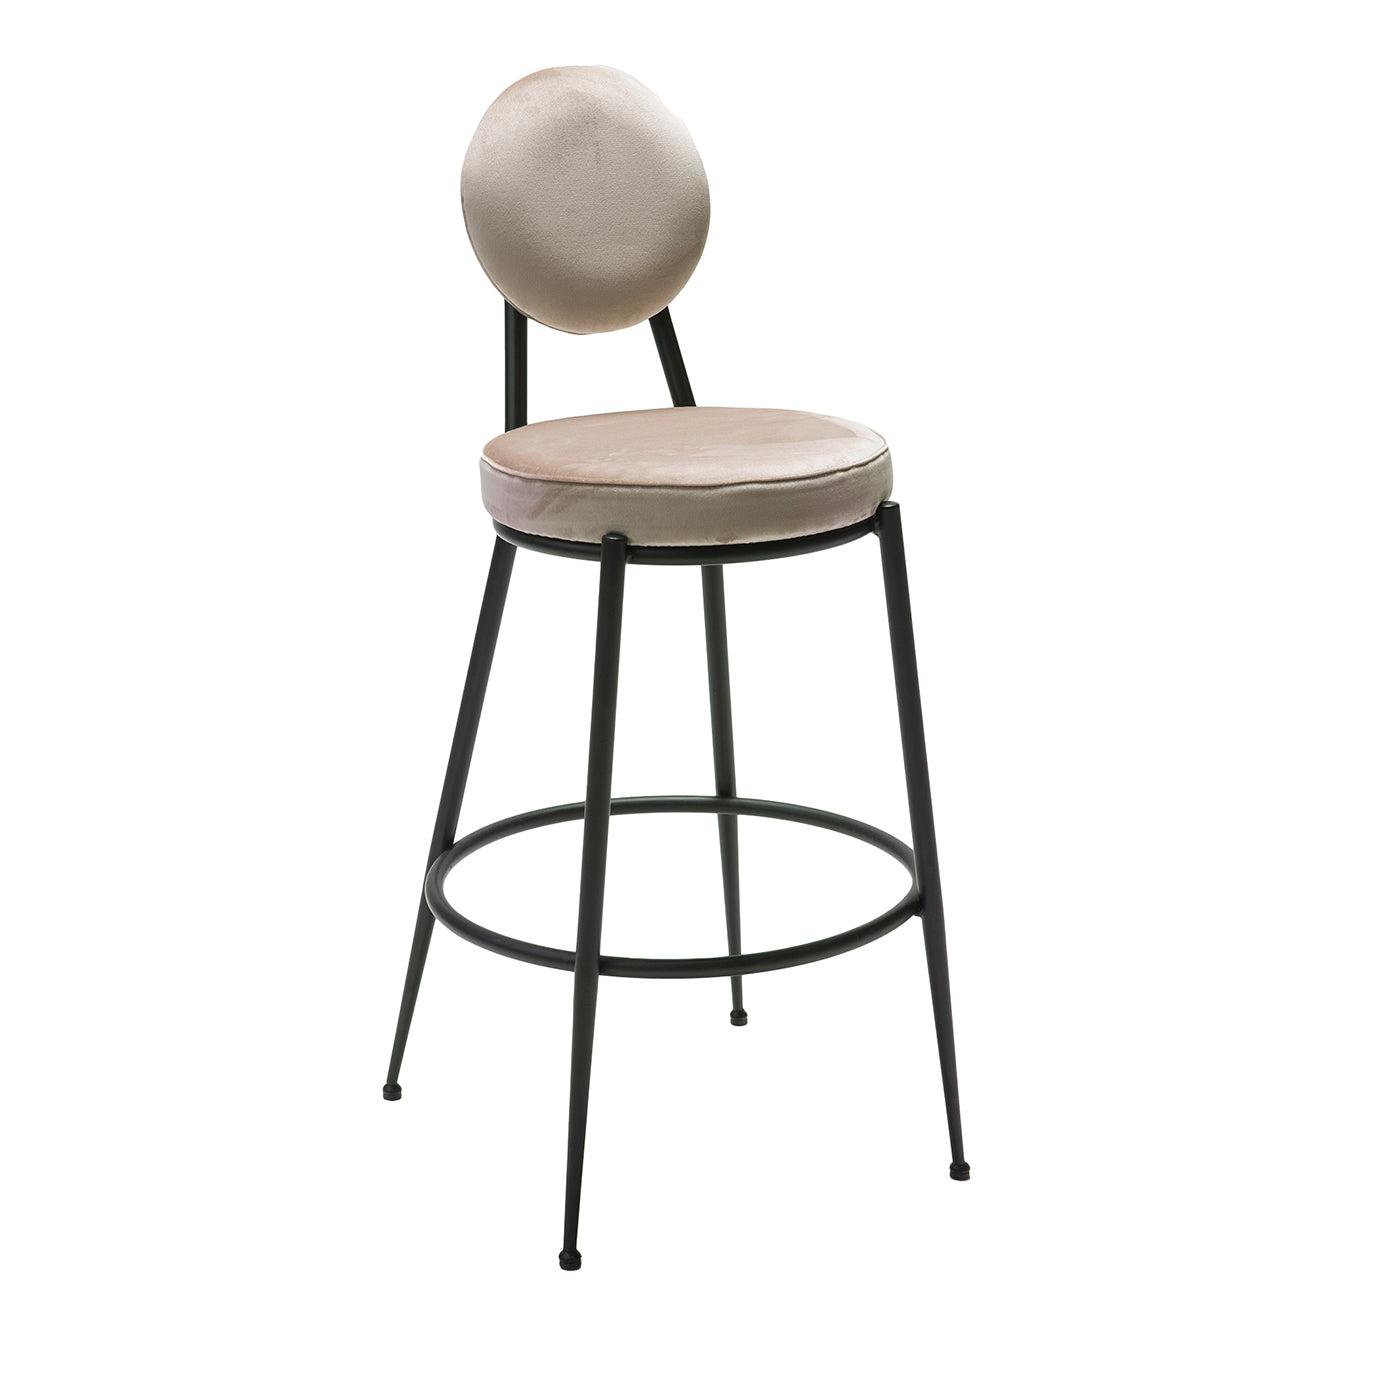 Amedeo Stool - Main view